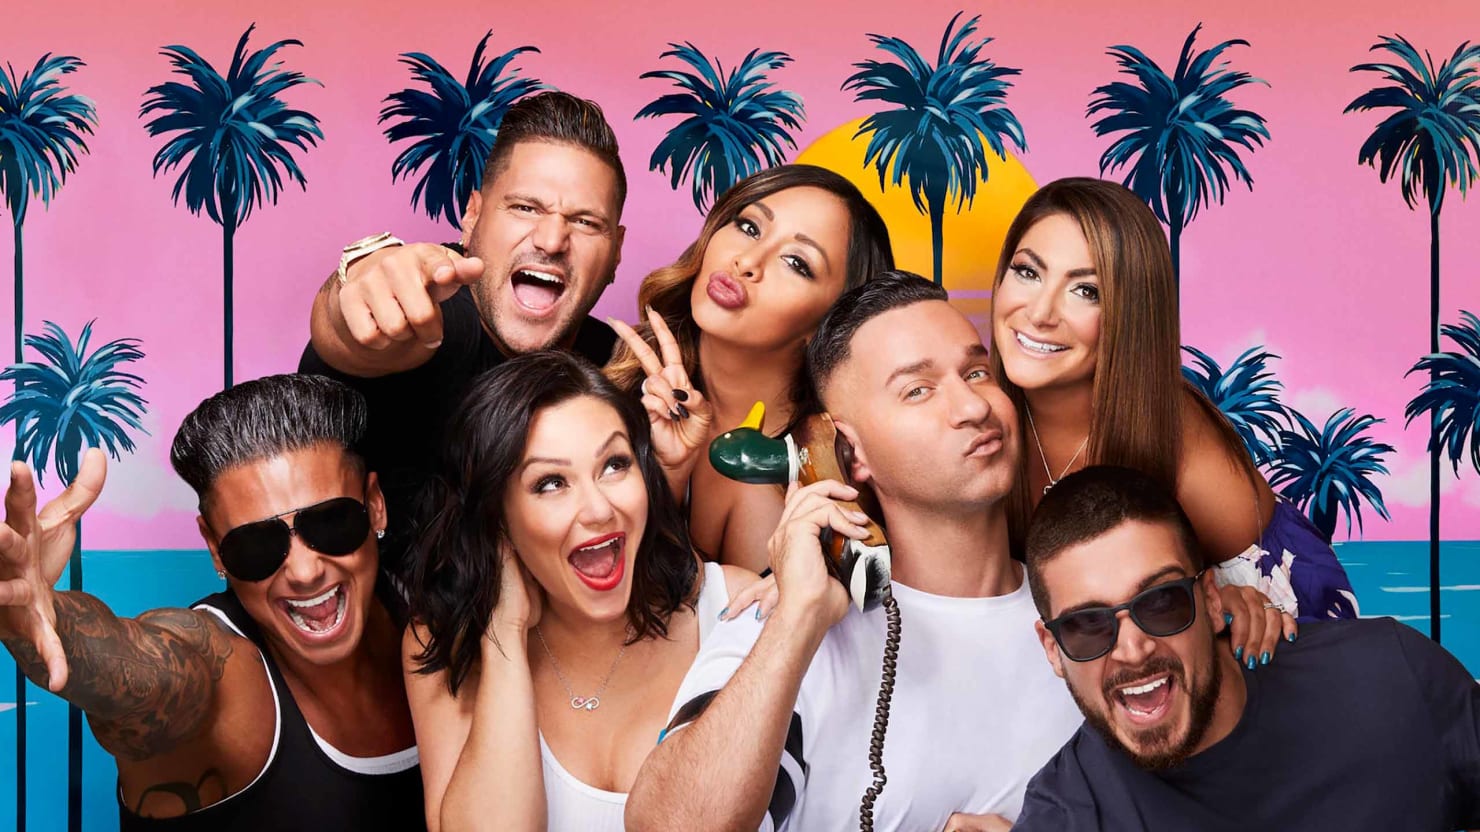 Jersey Shore: Family Vacation Full Episodes